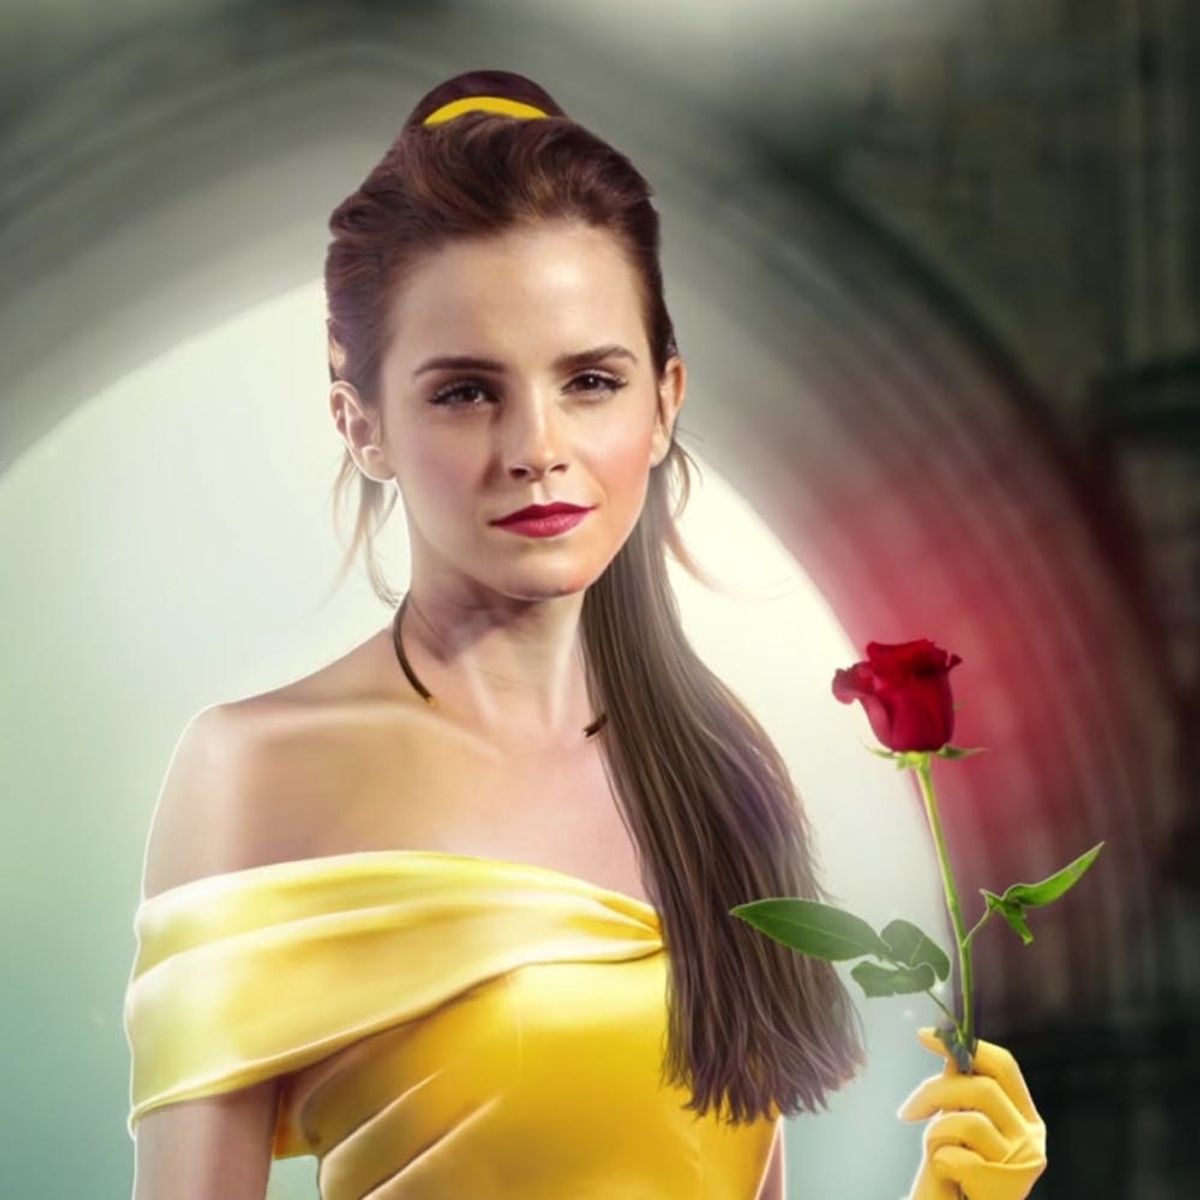 These Enchanted Rose Makeup Brushes Will Thrill Beauty and the Beast Fans